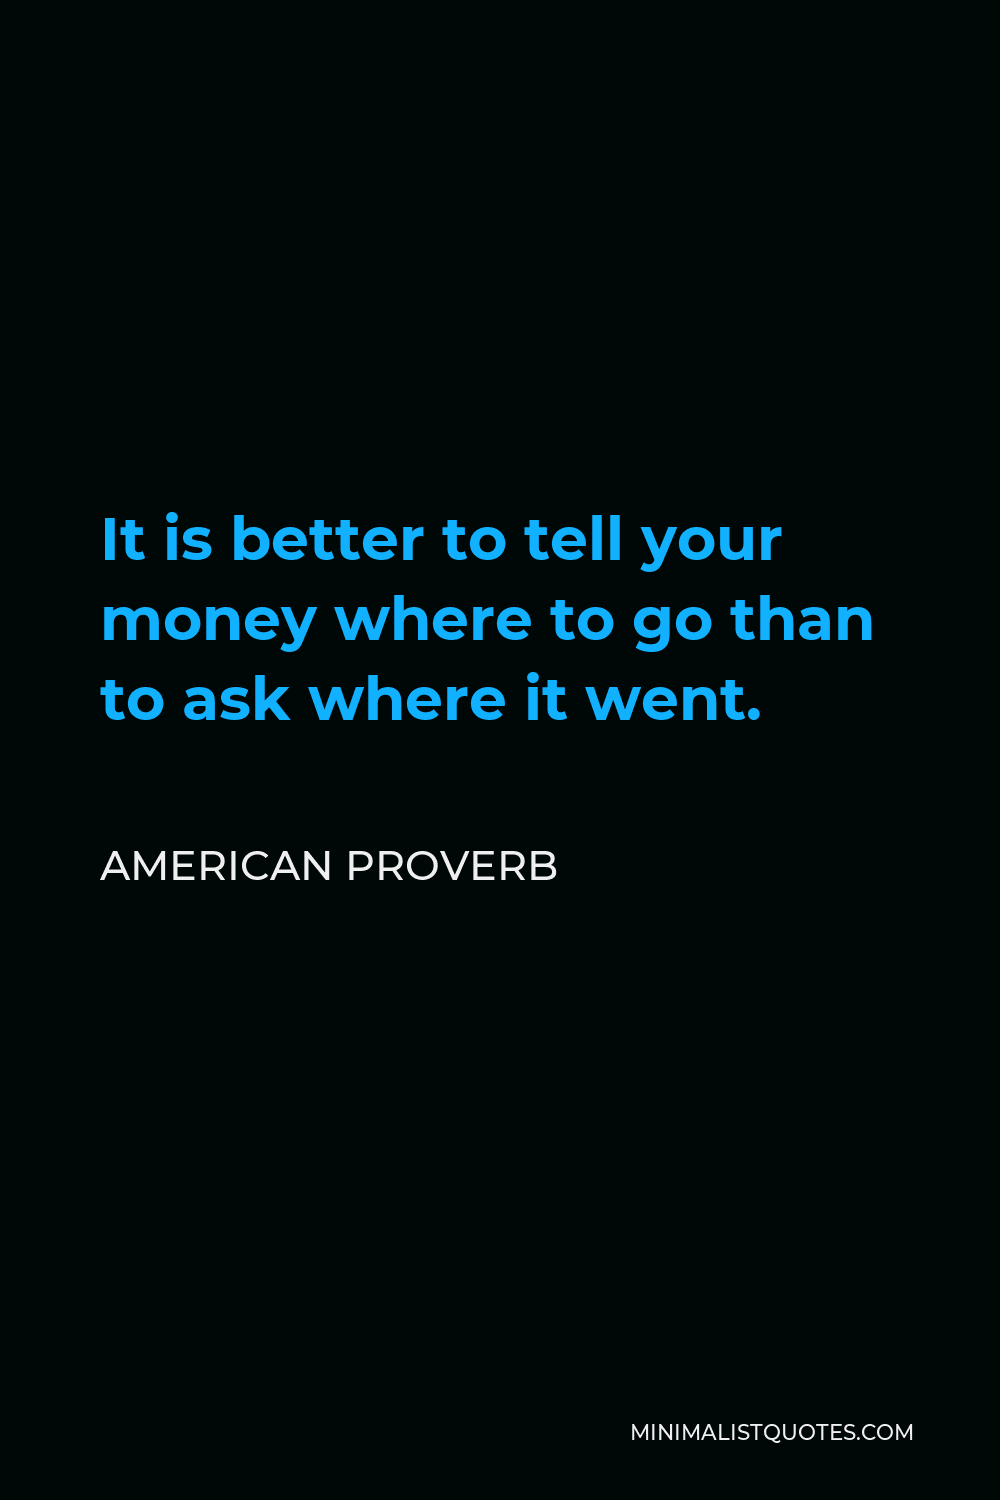 American Proverb Quote - It is better to tell your money where to go than to ask where it went.